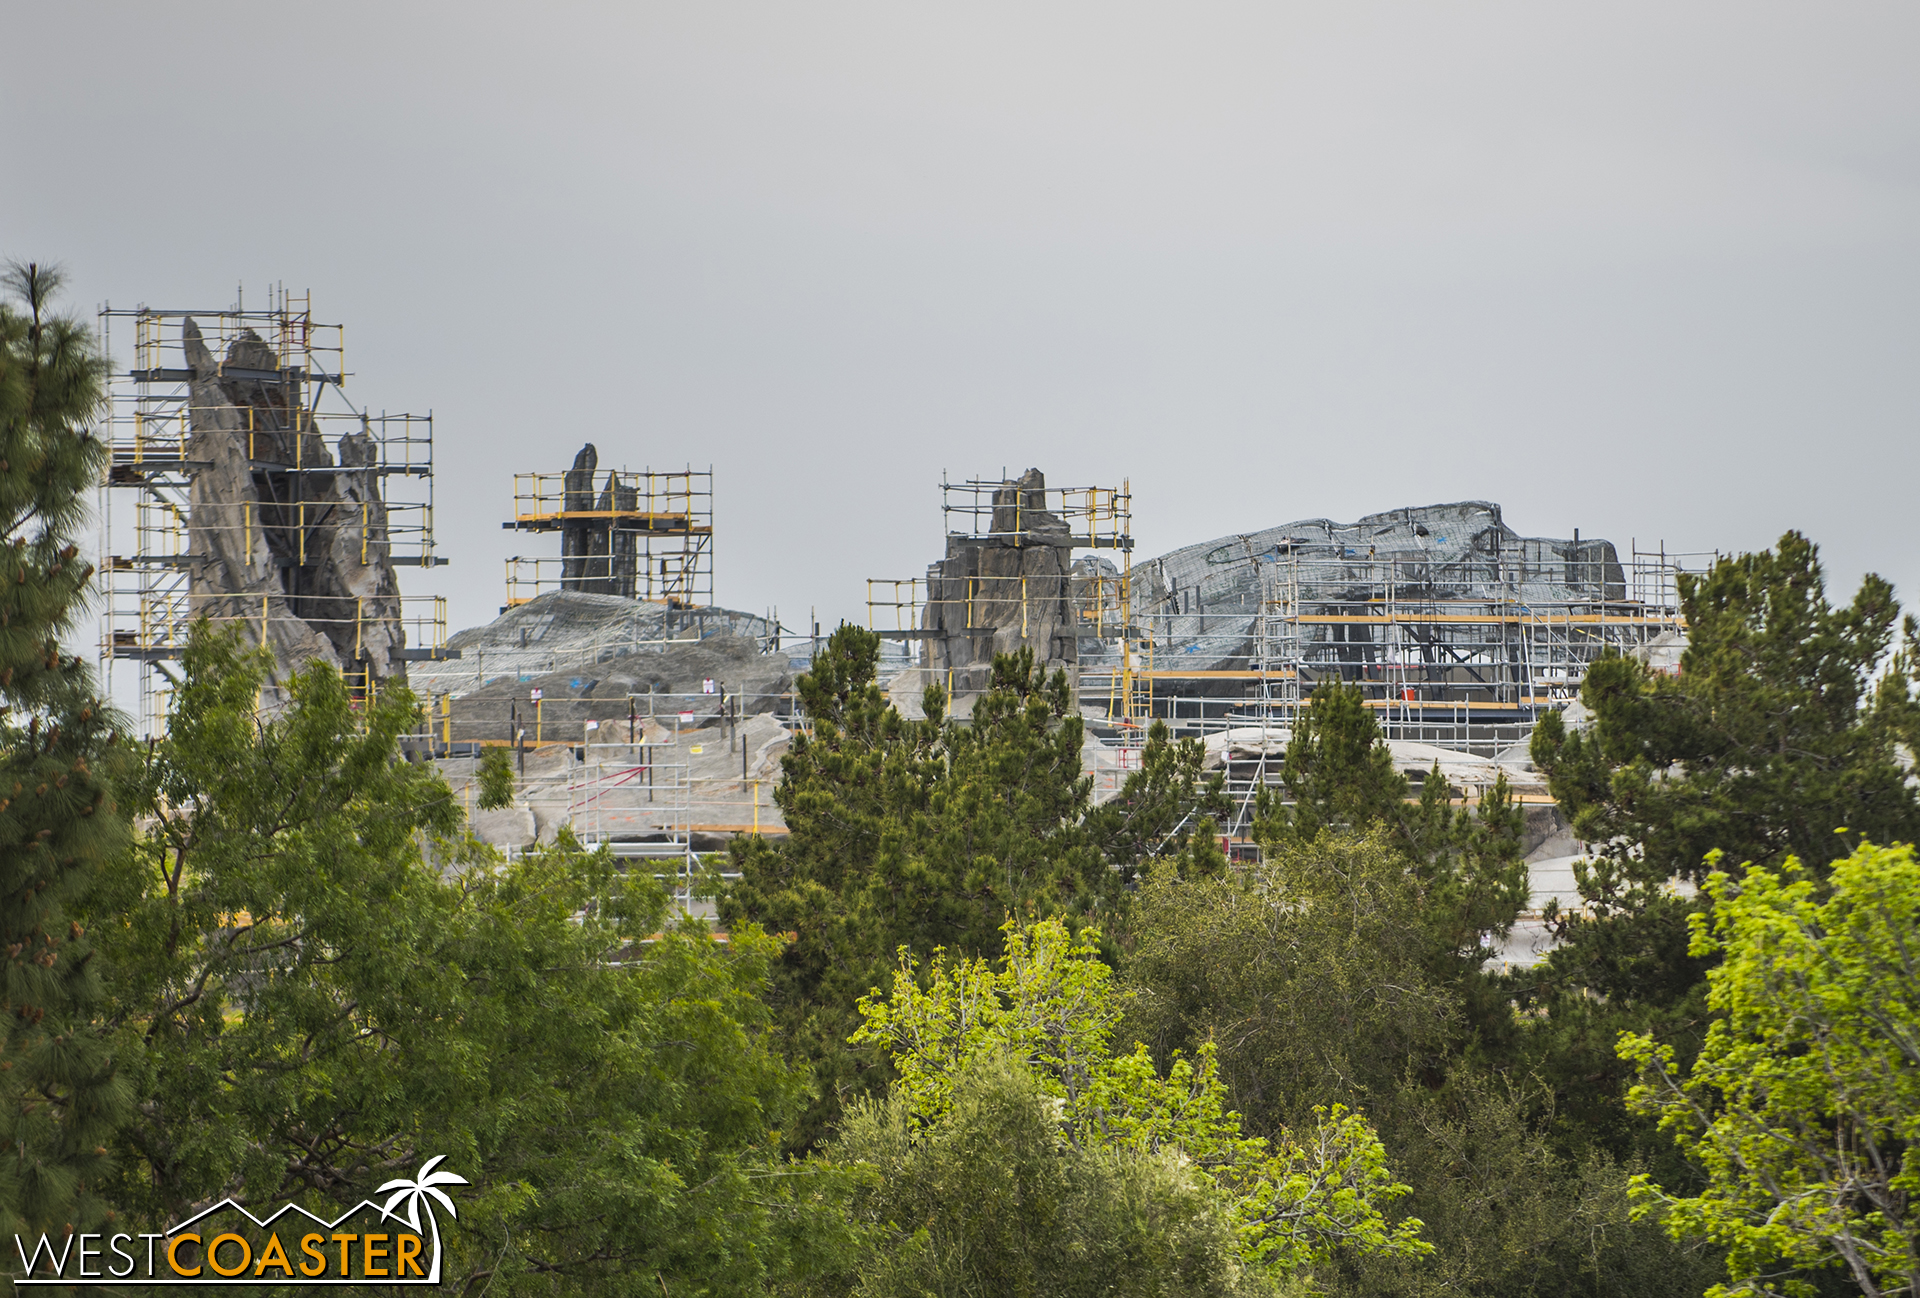  That these rocks are visible across the skyline is another testament to the scale of the project. 